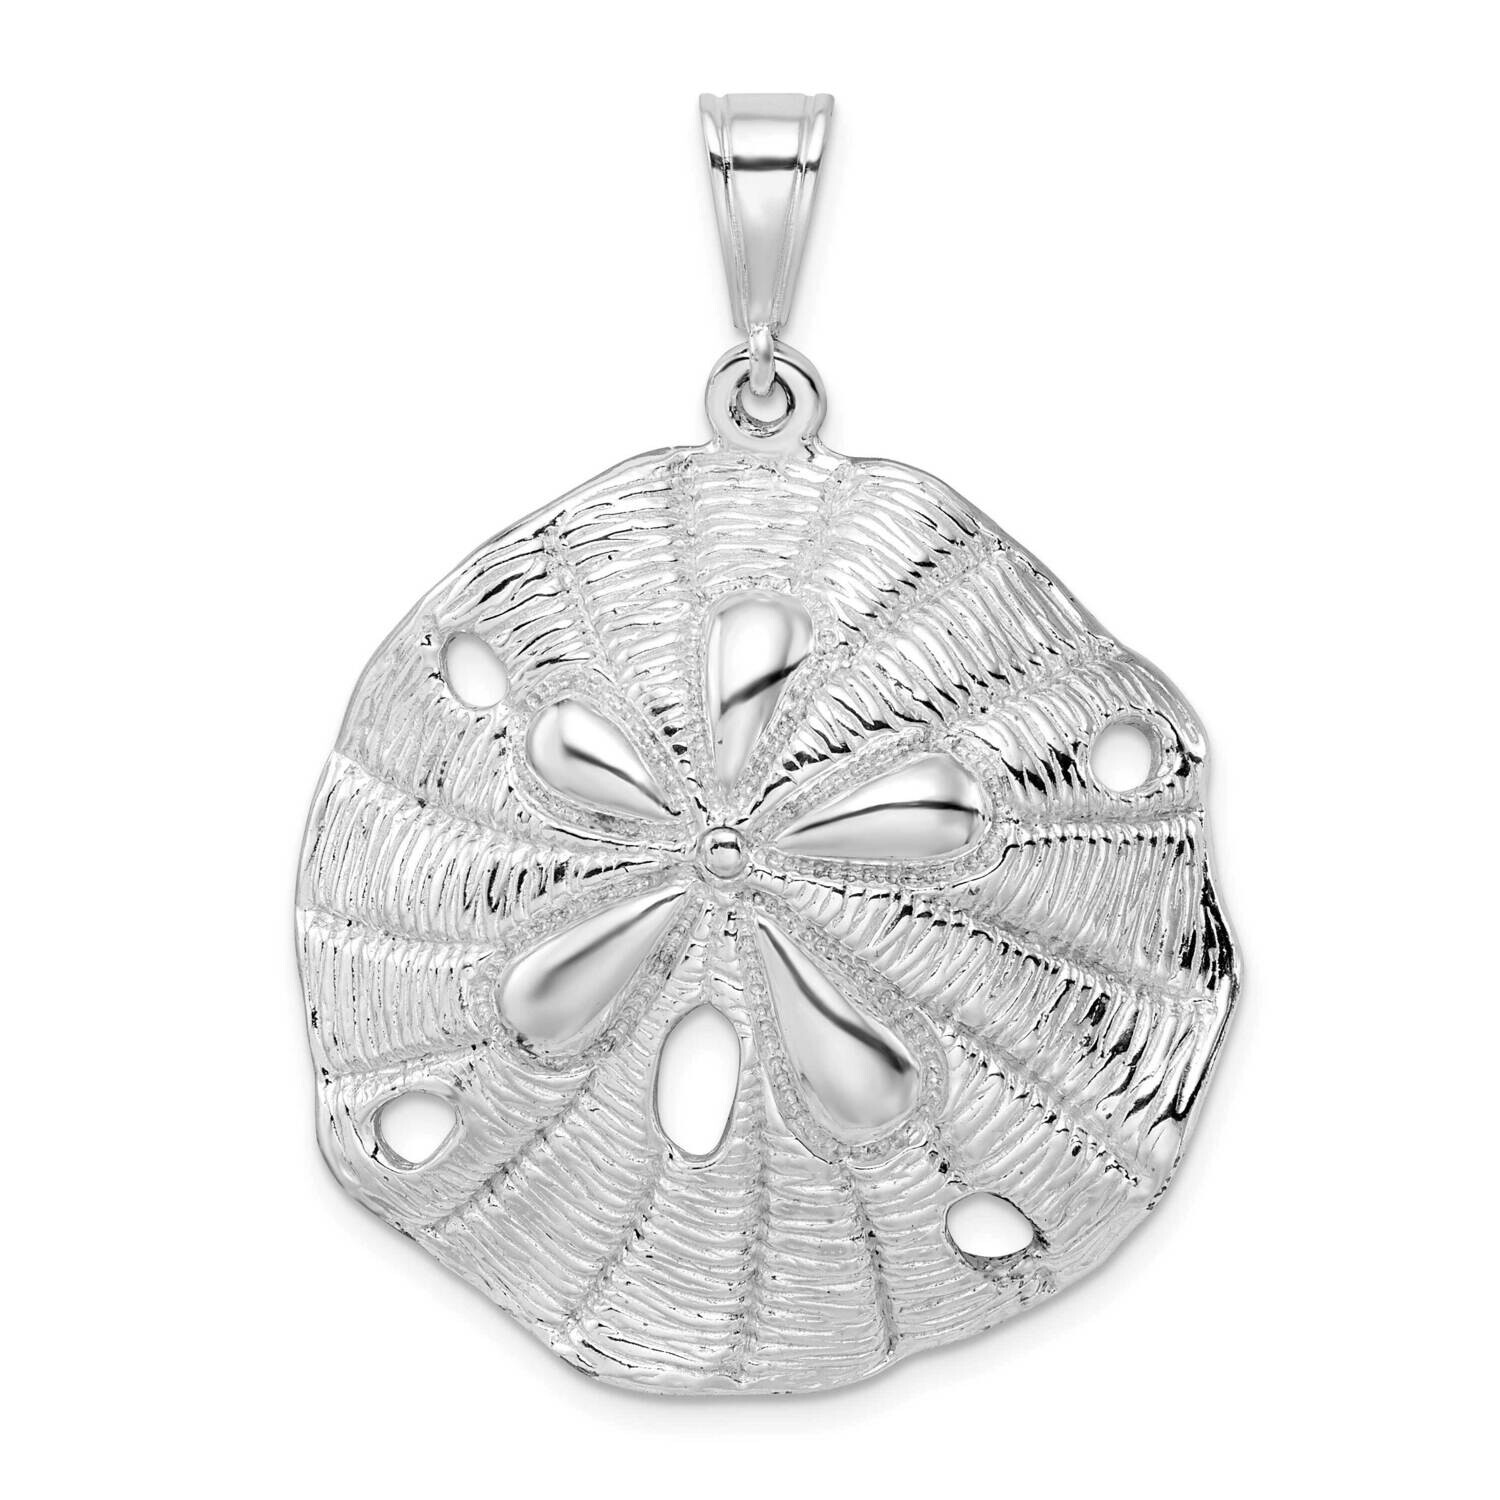 Textured Beveled SDollar Pendant Sterling Silver Polished QC10055